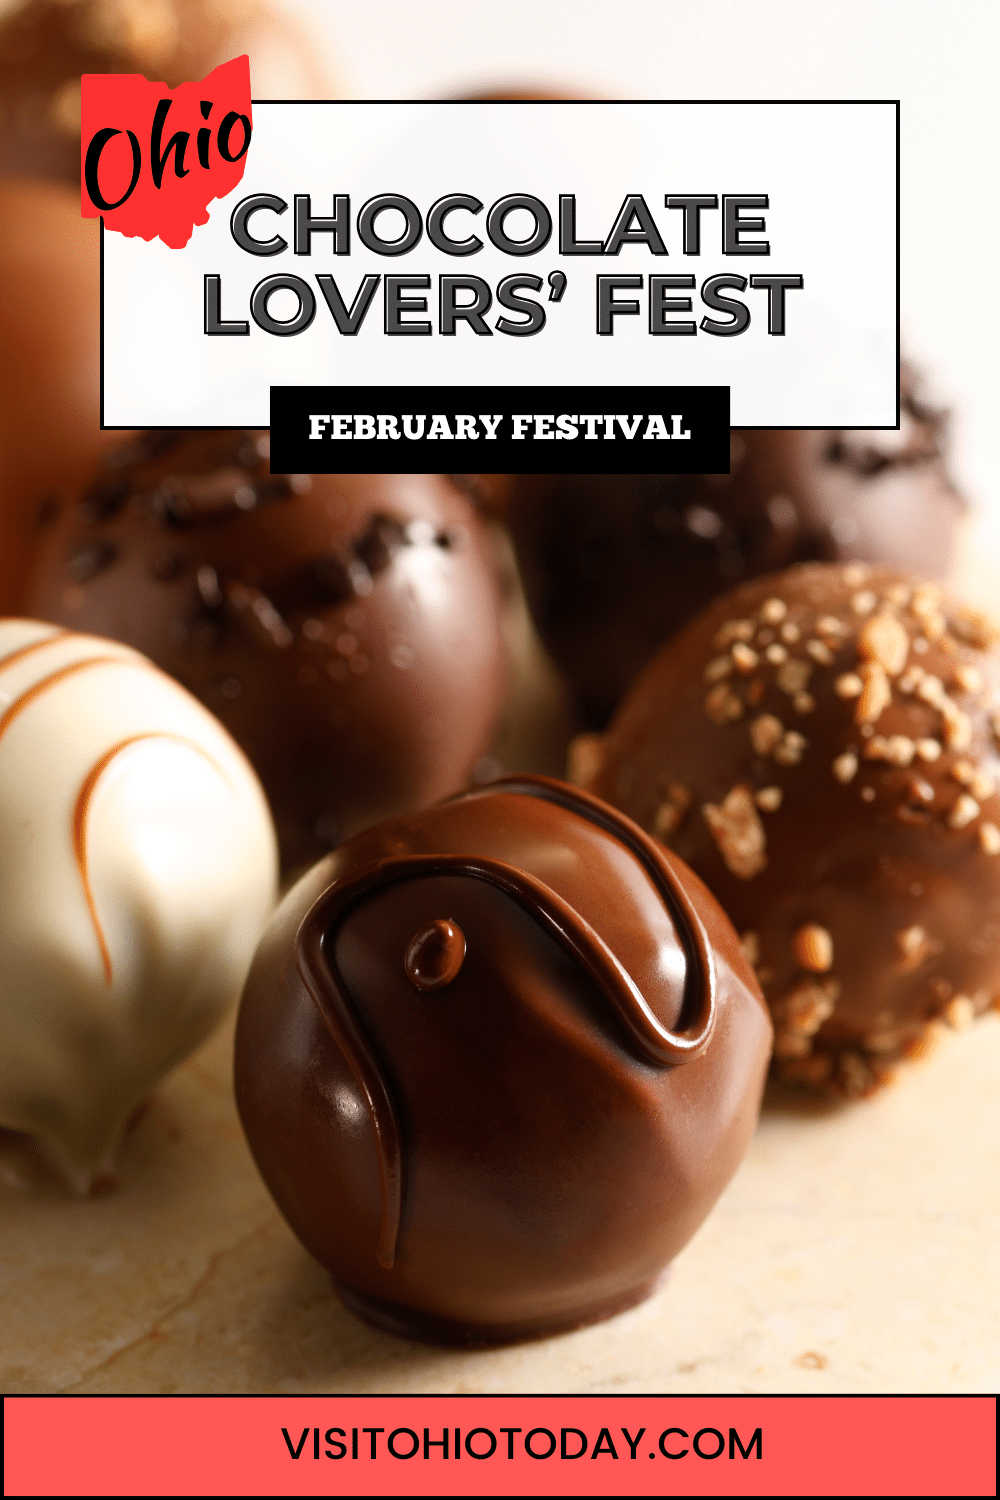 Chocolate Lovers’ Fest is an annual homemade chocolate festival that takes place in Genoa in mid-February.